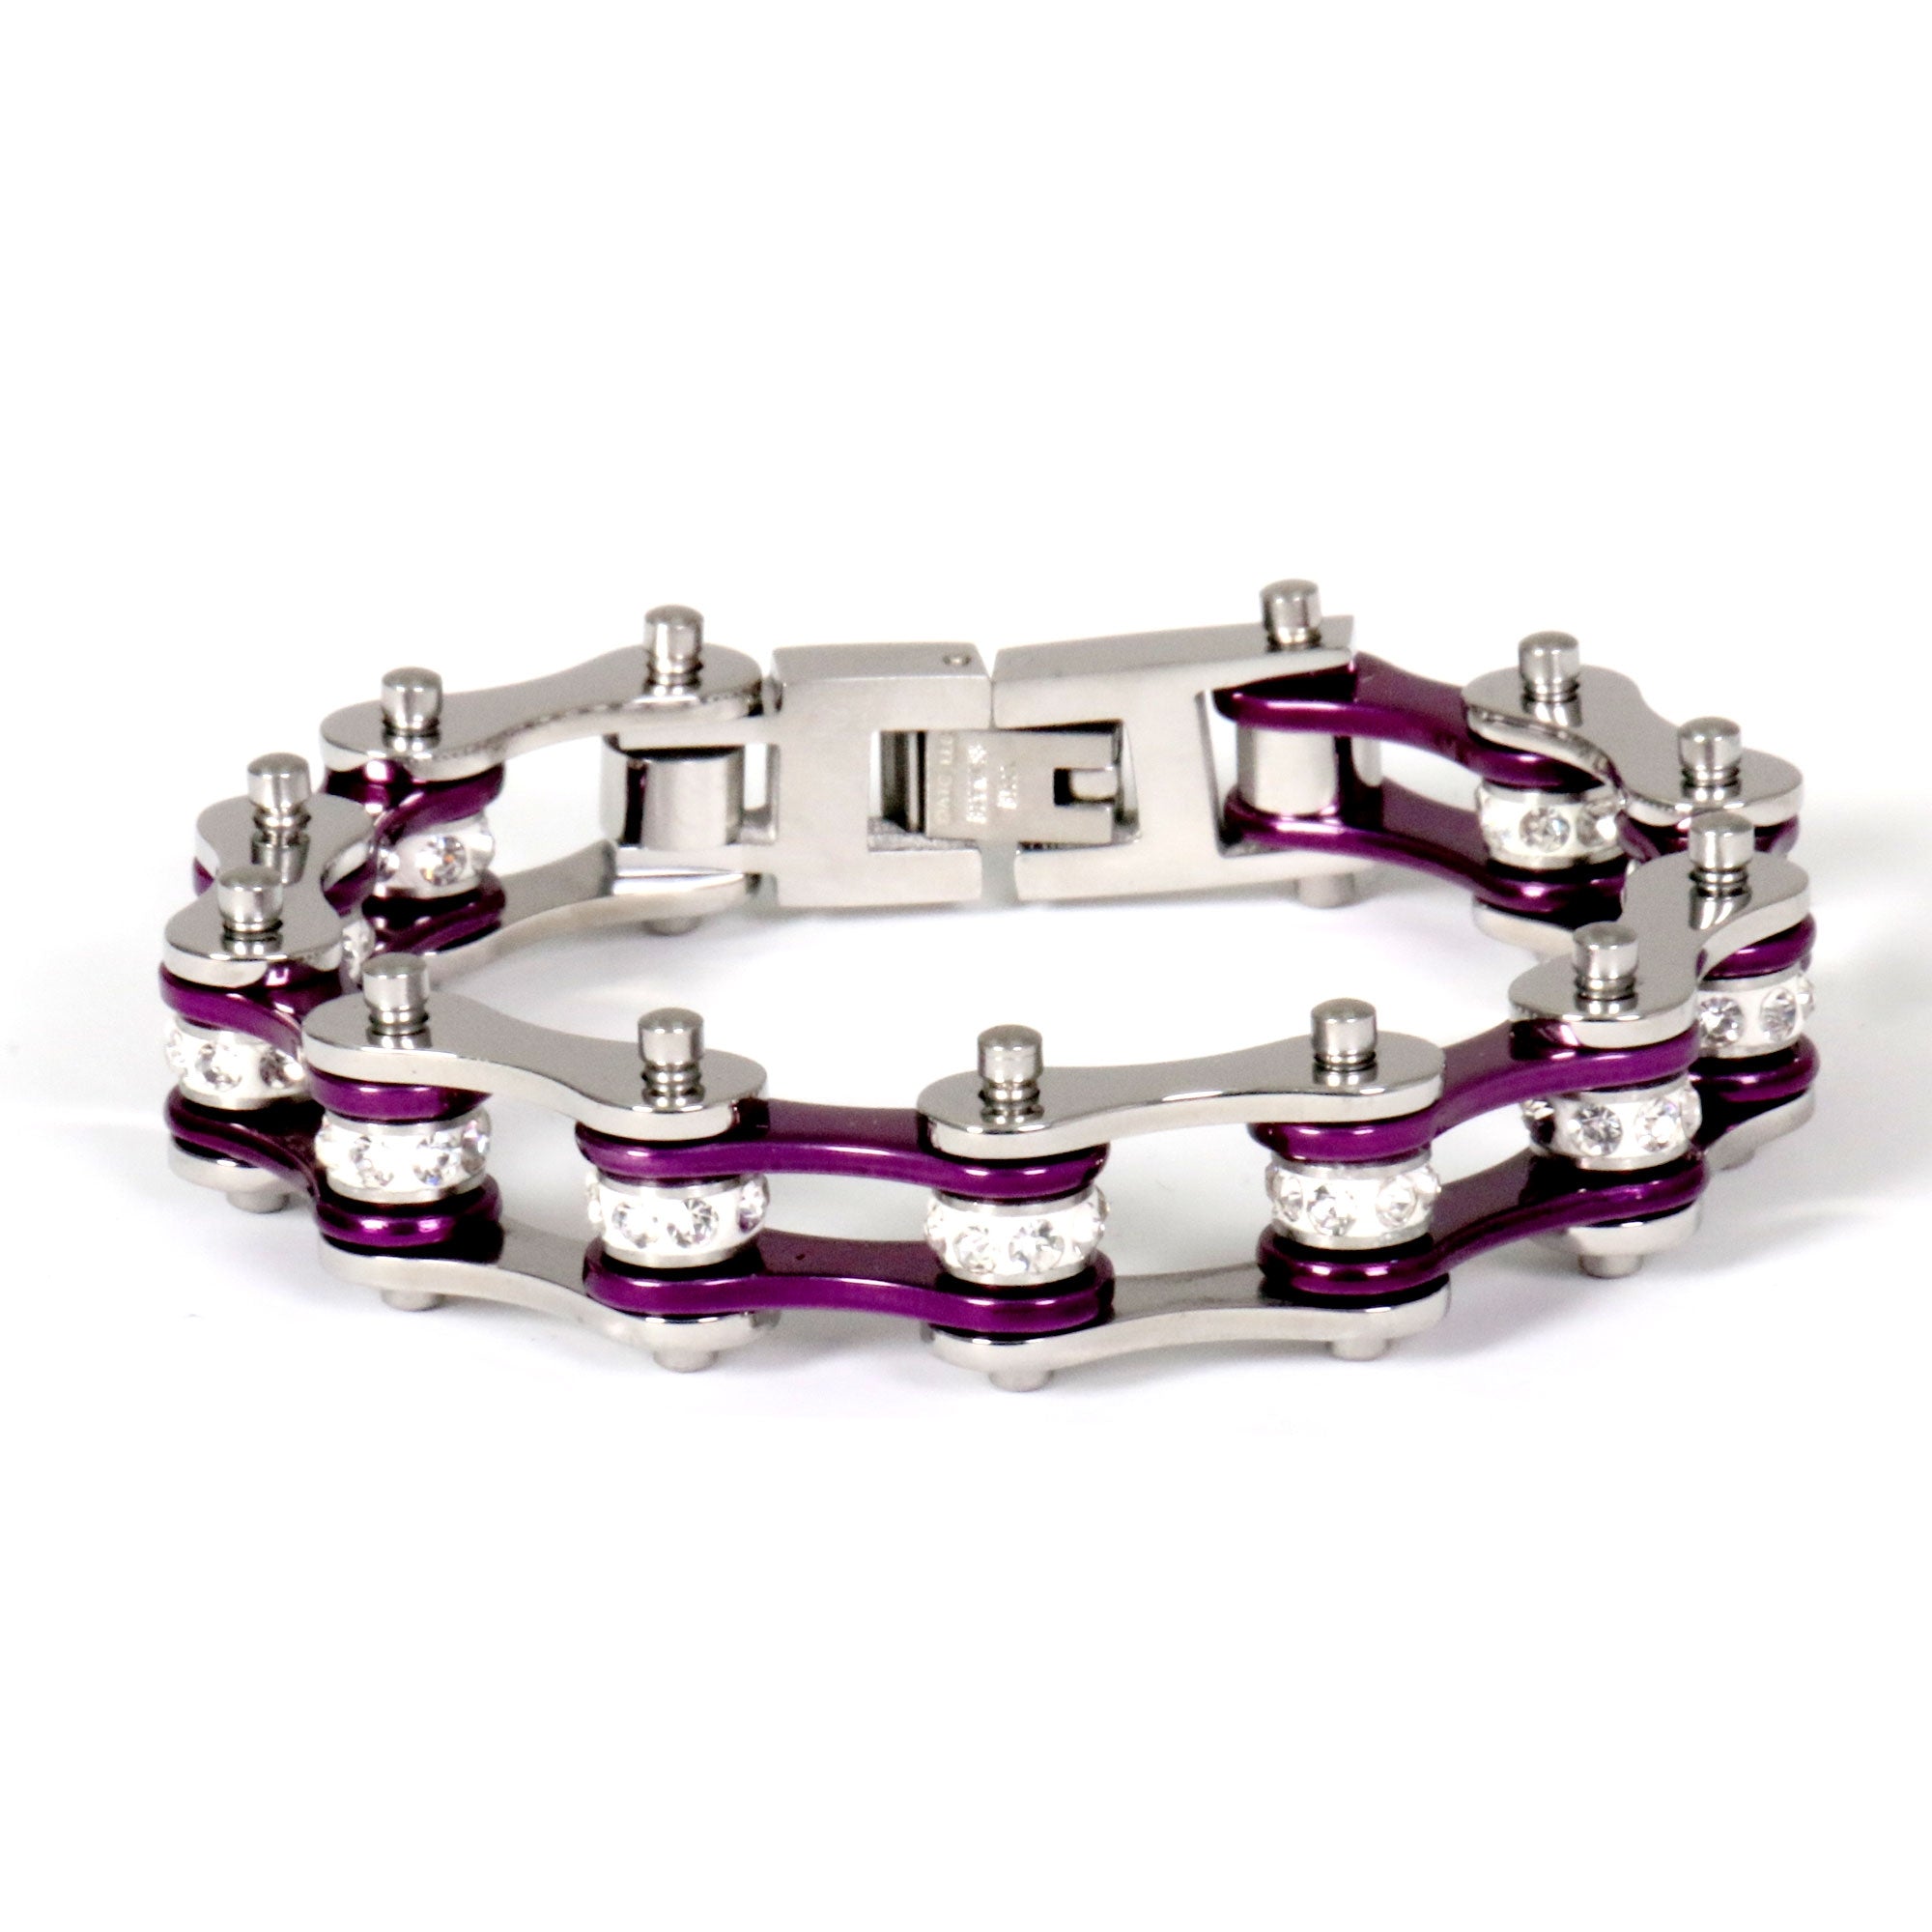 Hot Leathers JWB3106 Purple Motorcycle Chain Stainless Steel Bracelets